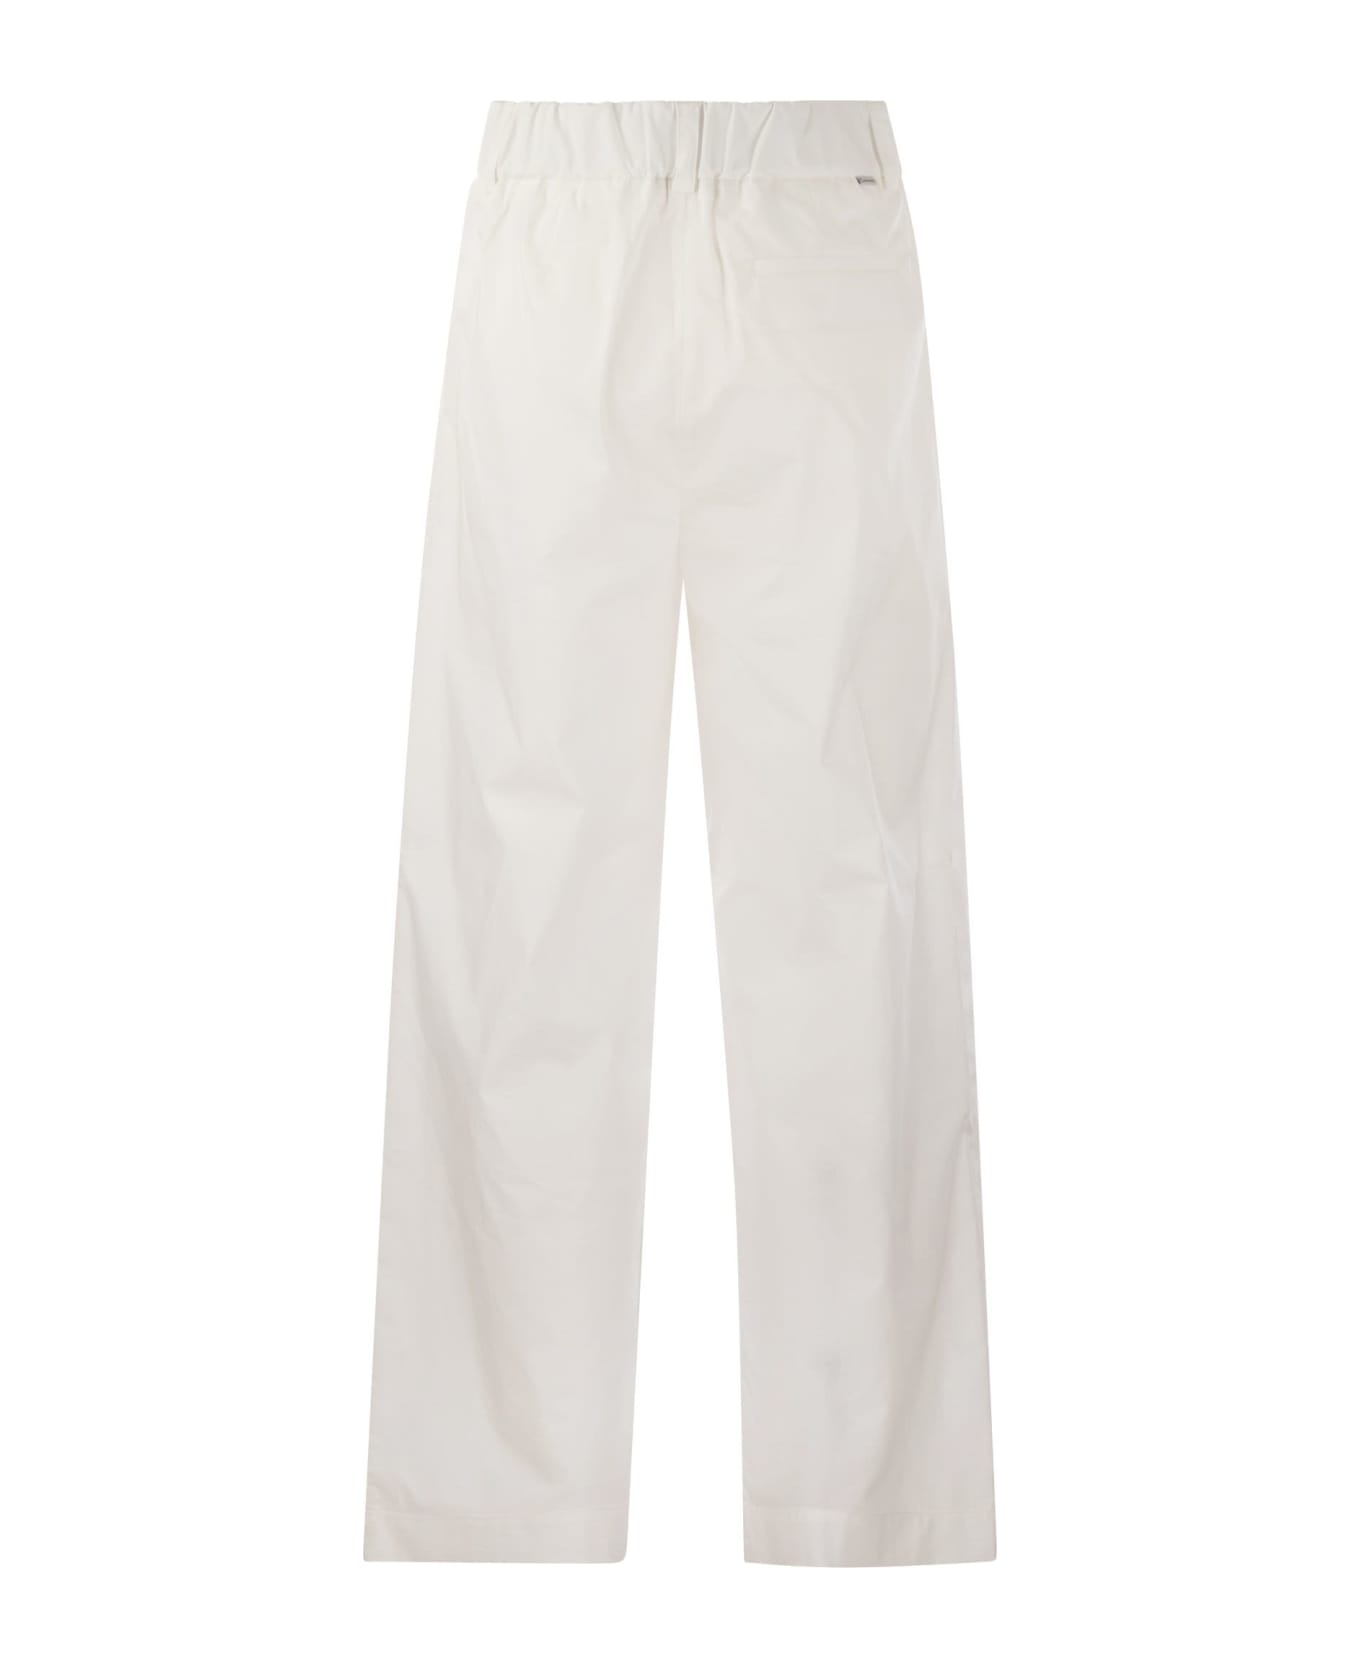 Woolrich Cotton Pleated Trousers - White ボトムス